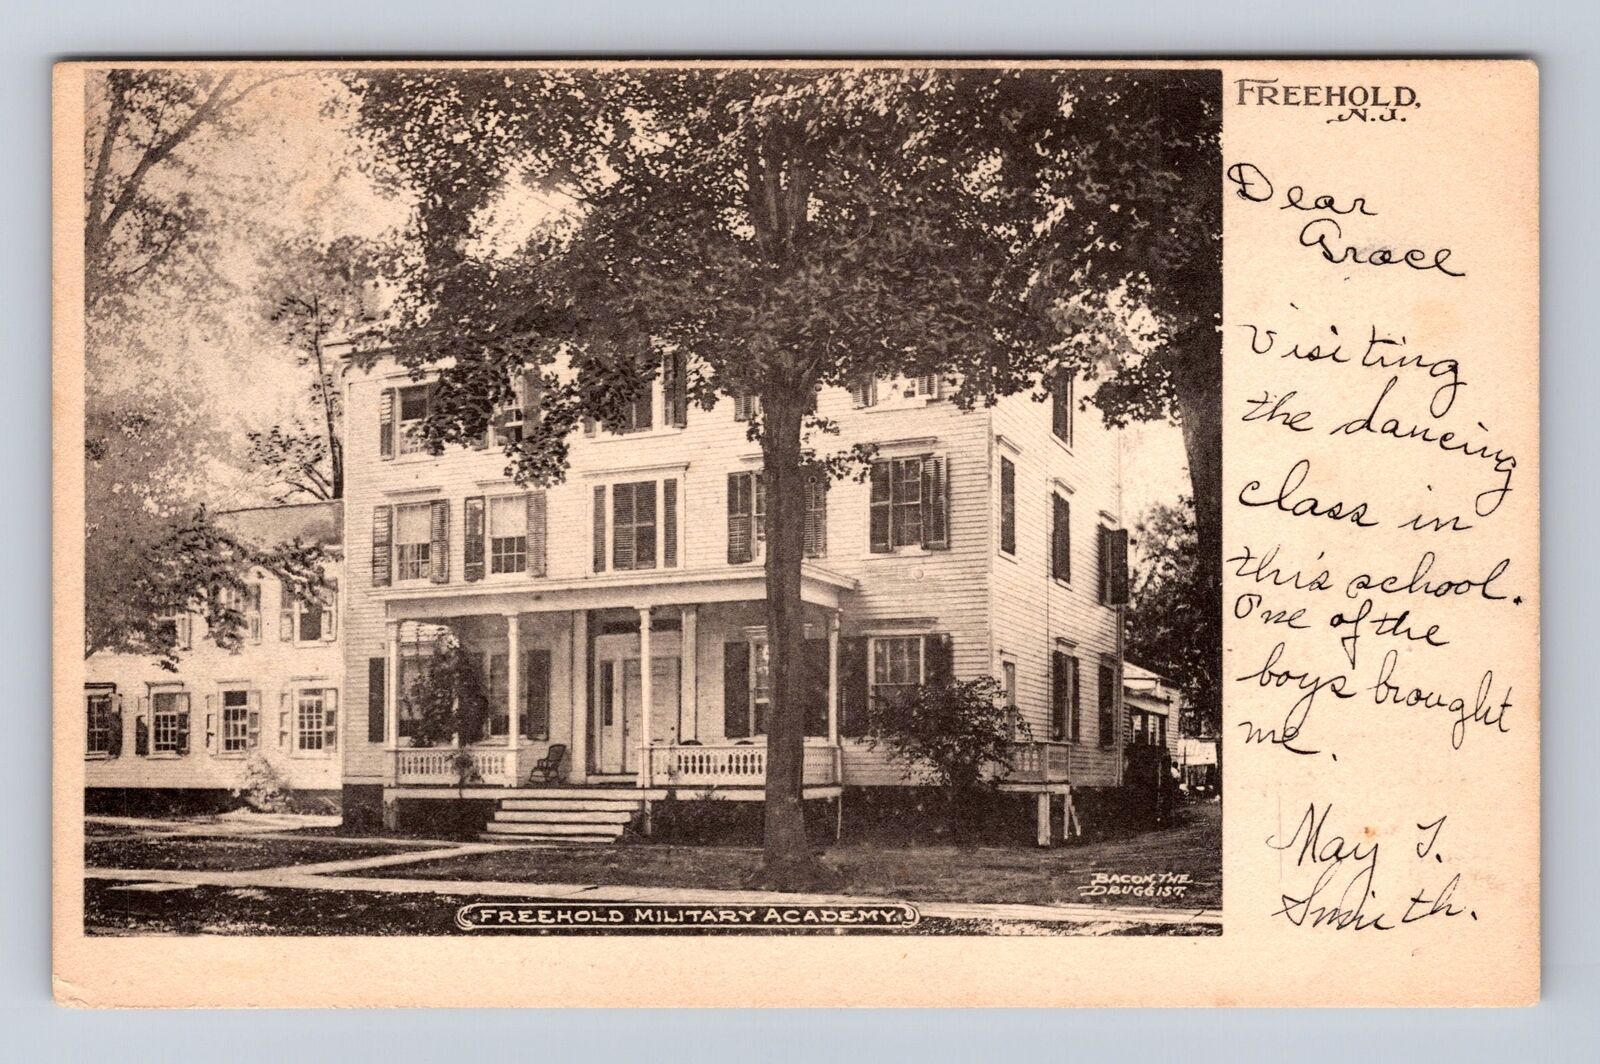 Freehold NJ-New Jersey, Freehold Military Academy, Antique Vintage Postcard